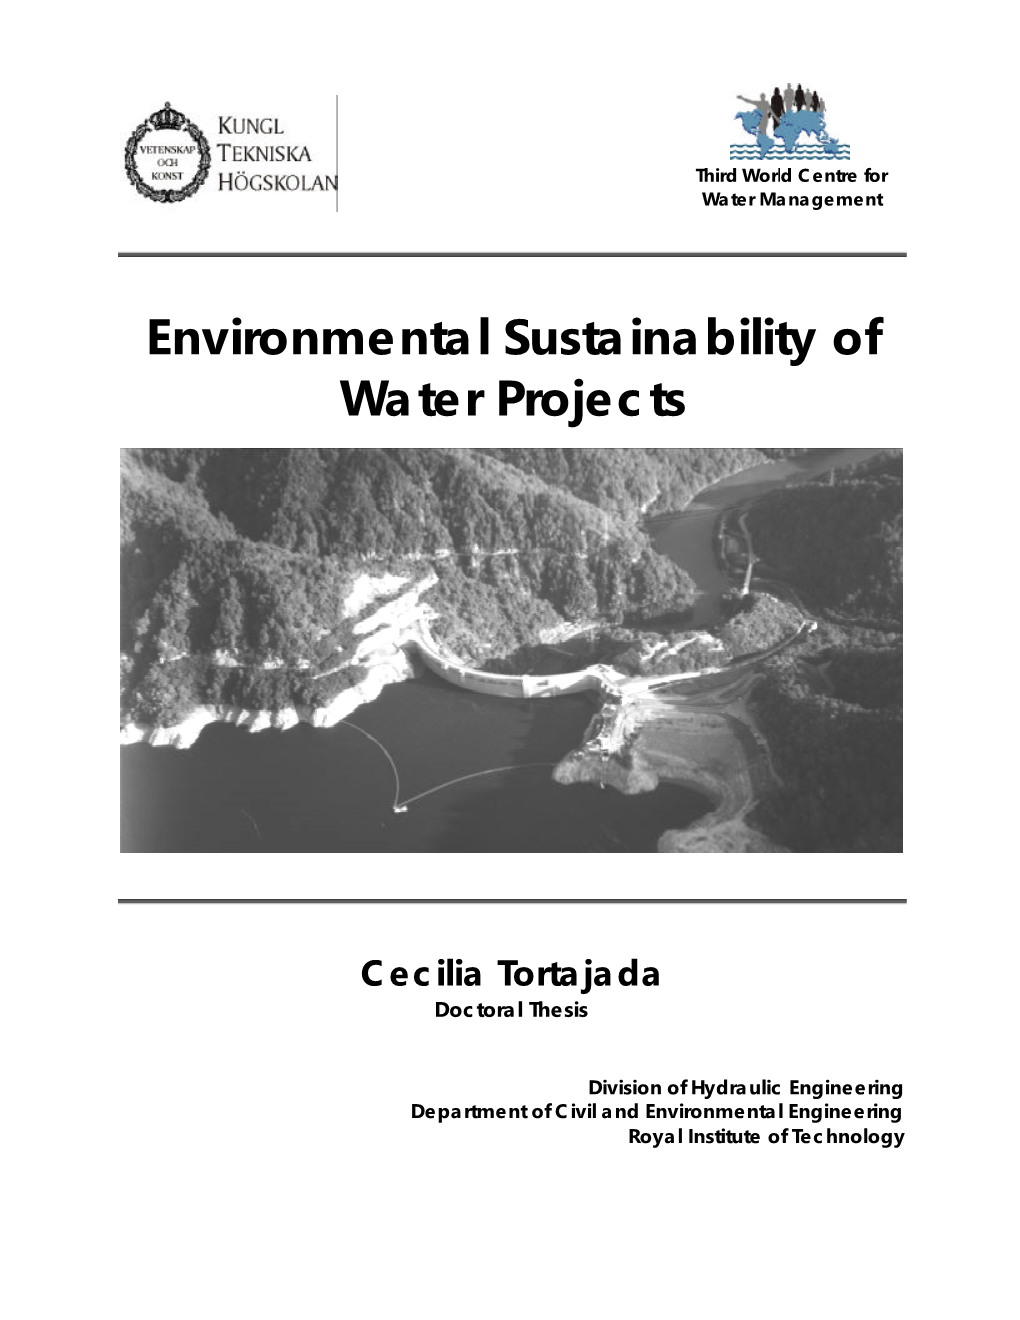 Environmental Sustainability of Water Projects